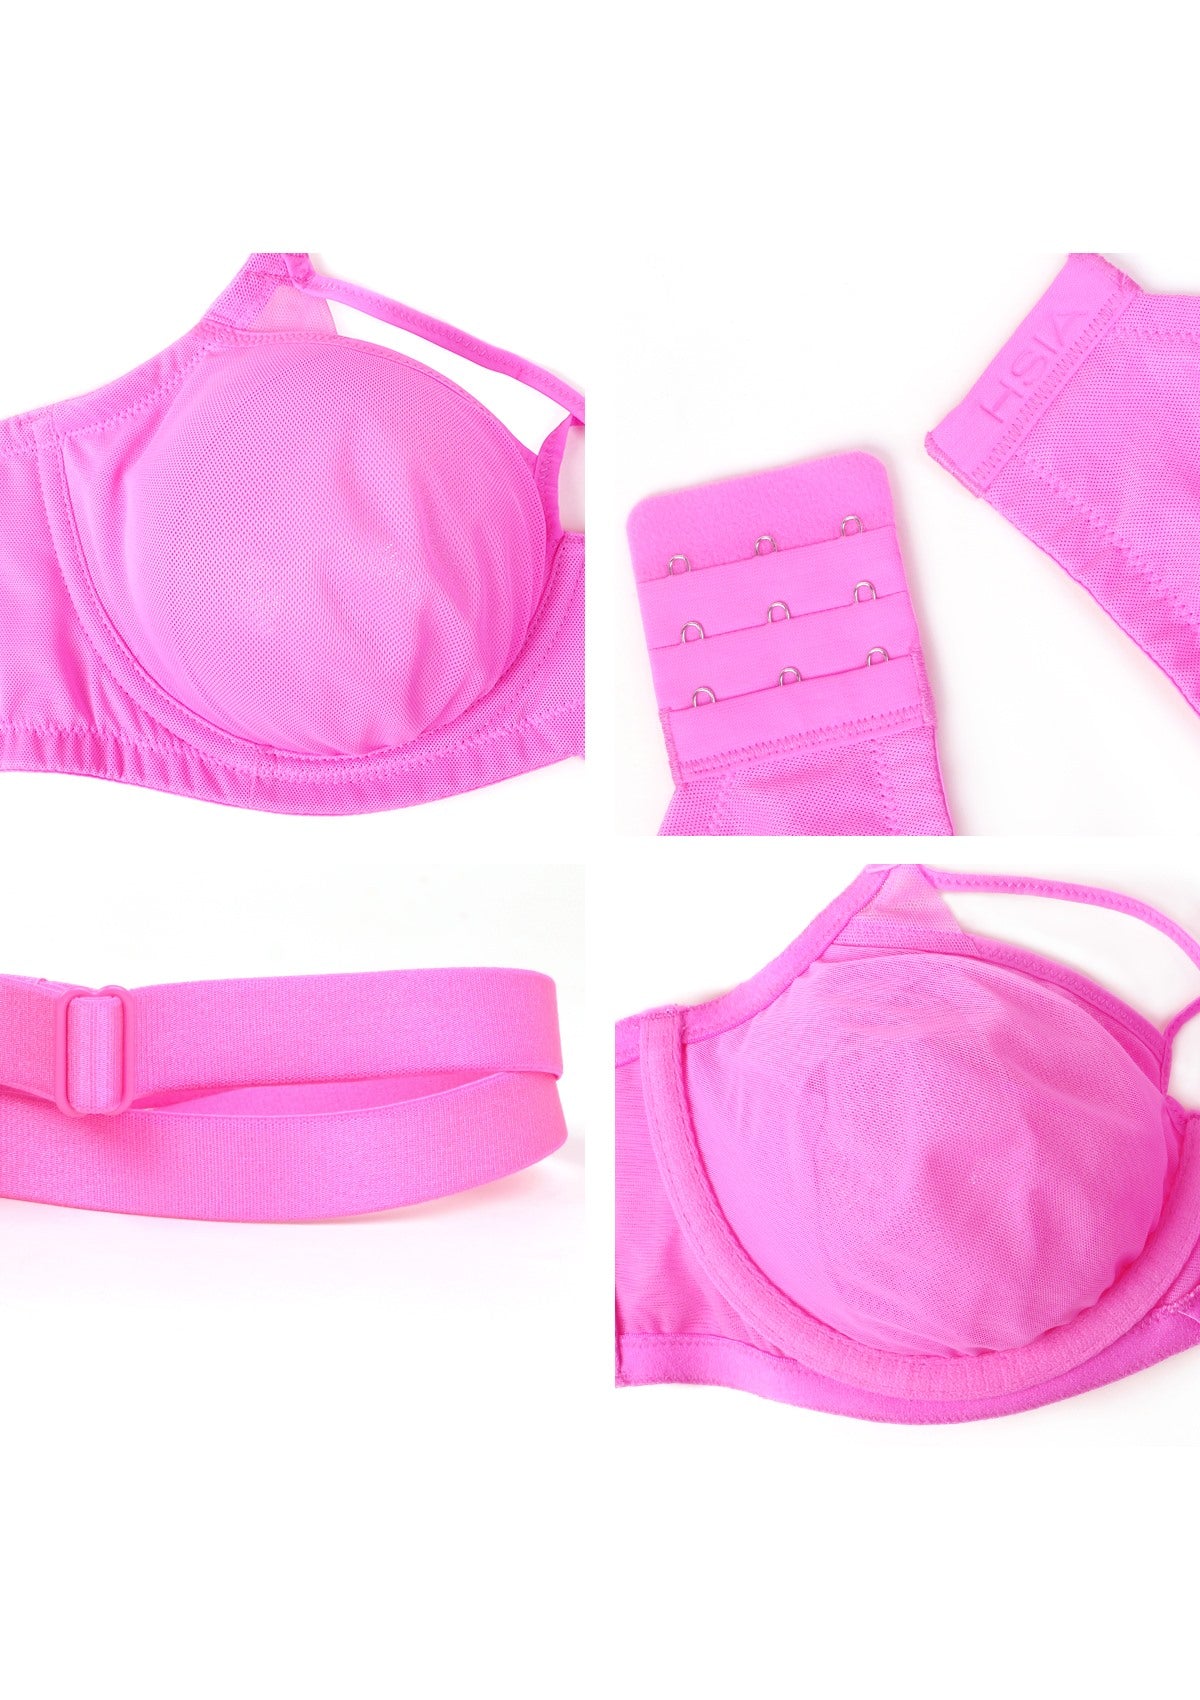 HSIA Billie Cross Front Strap Smooth Sheer Mesh Comfy Underwire Bra - Barbie Pink / 36 / DD/E